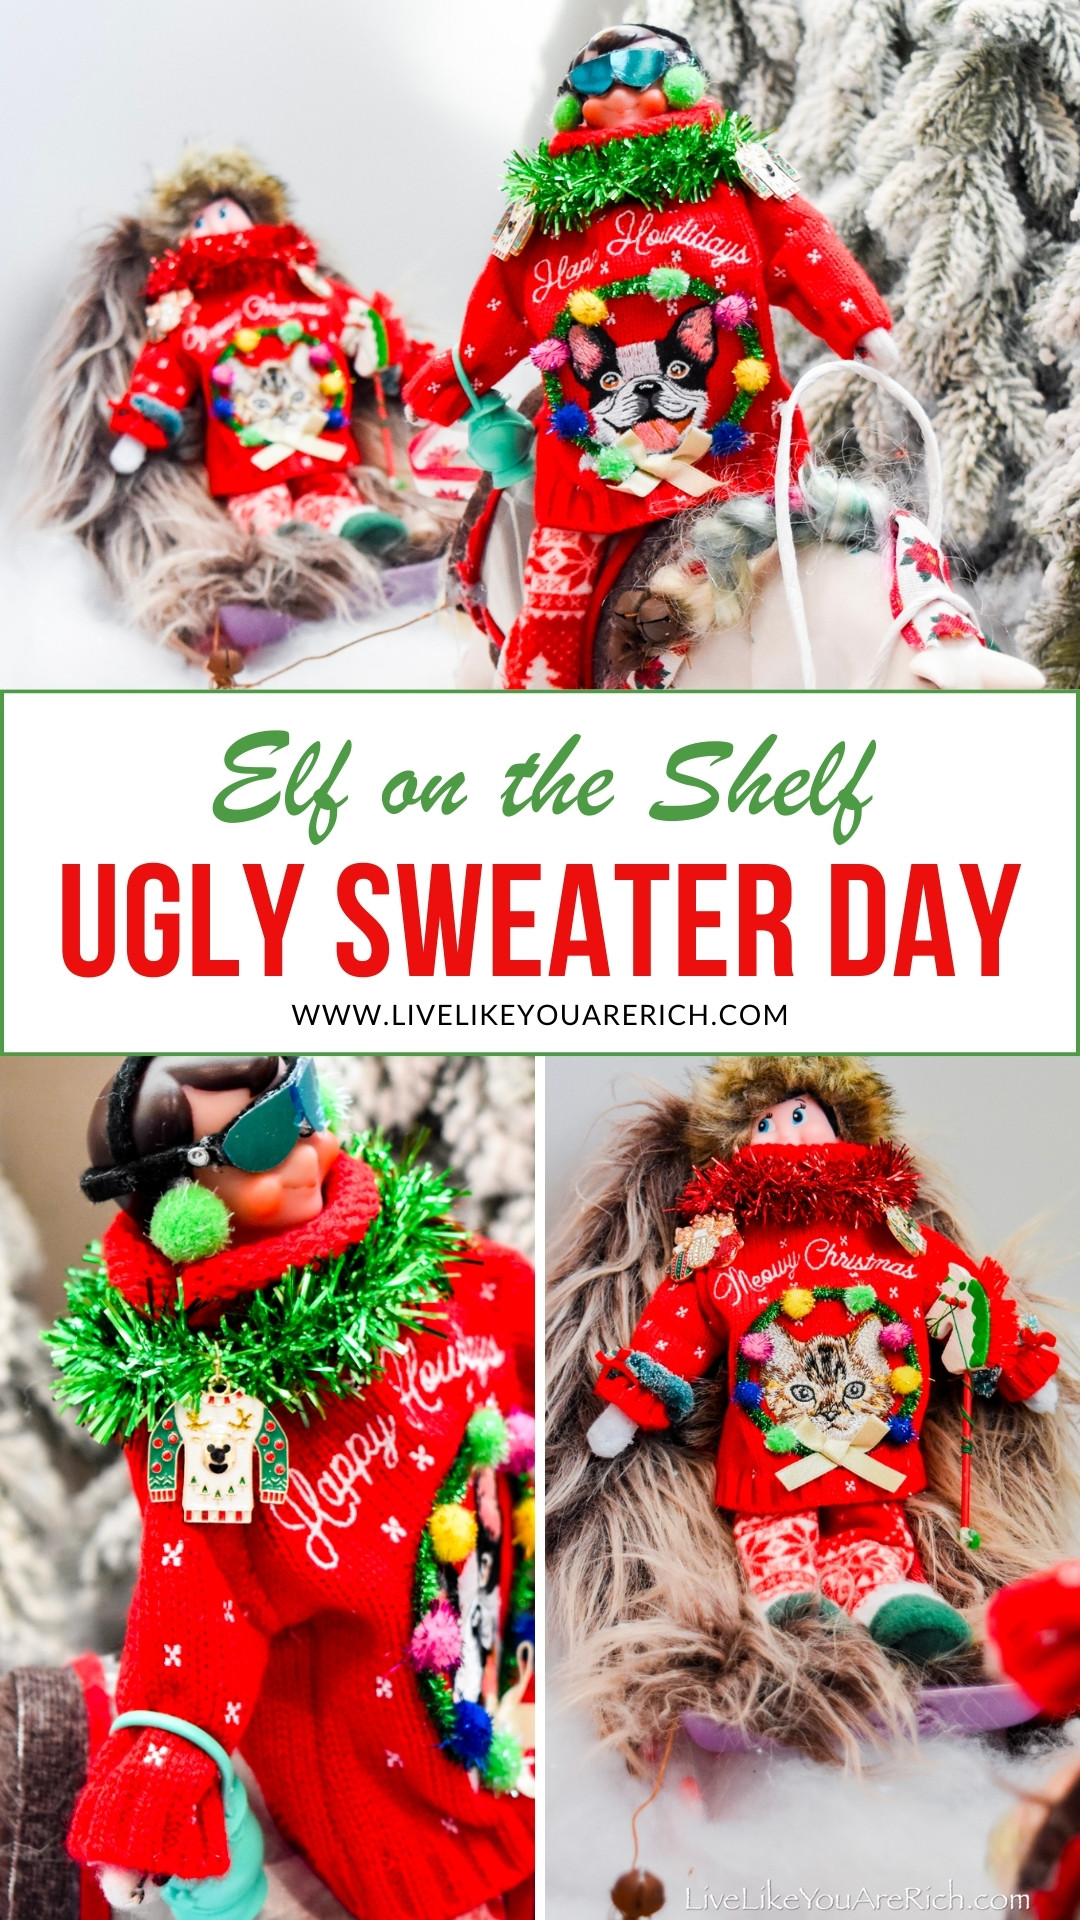 Elf on the Shelf: Ugly Sweater Day